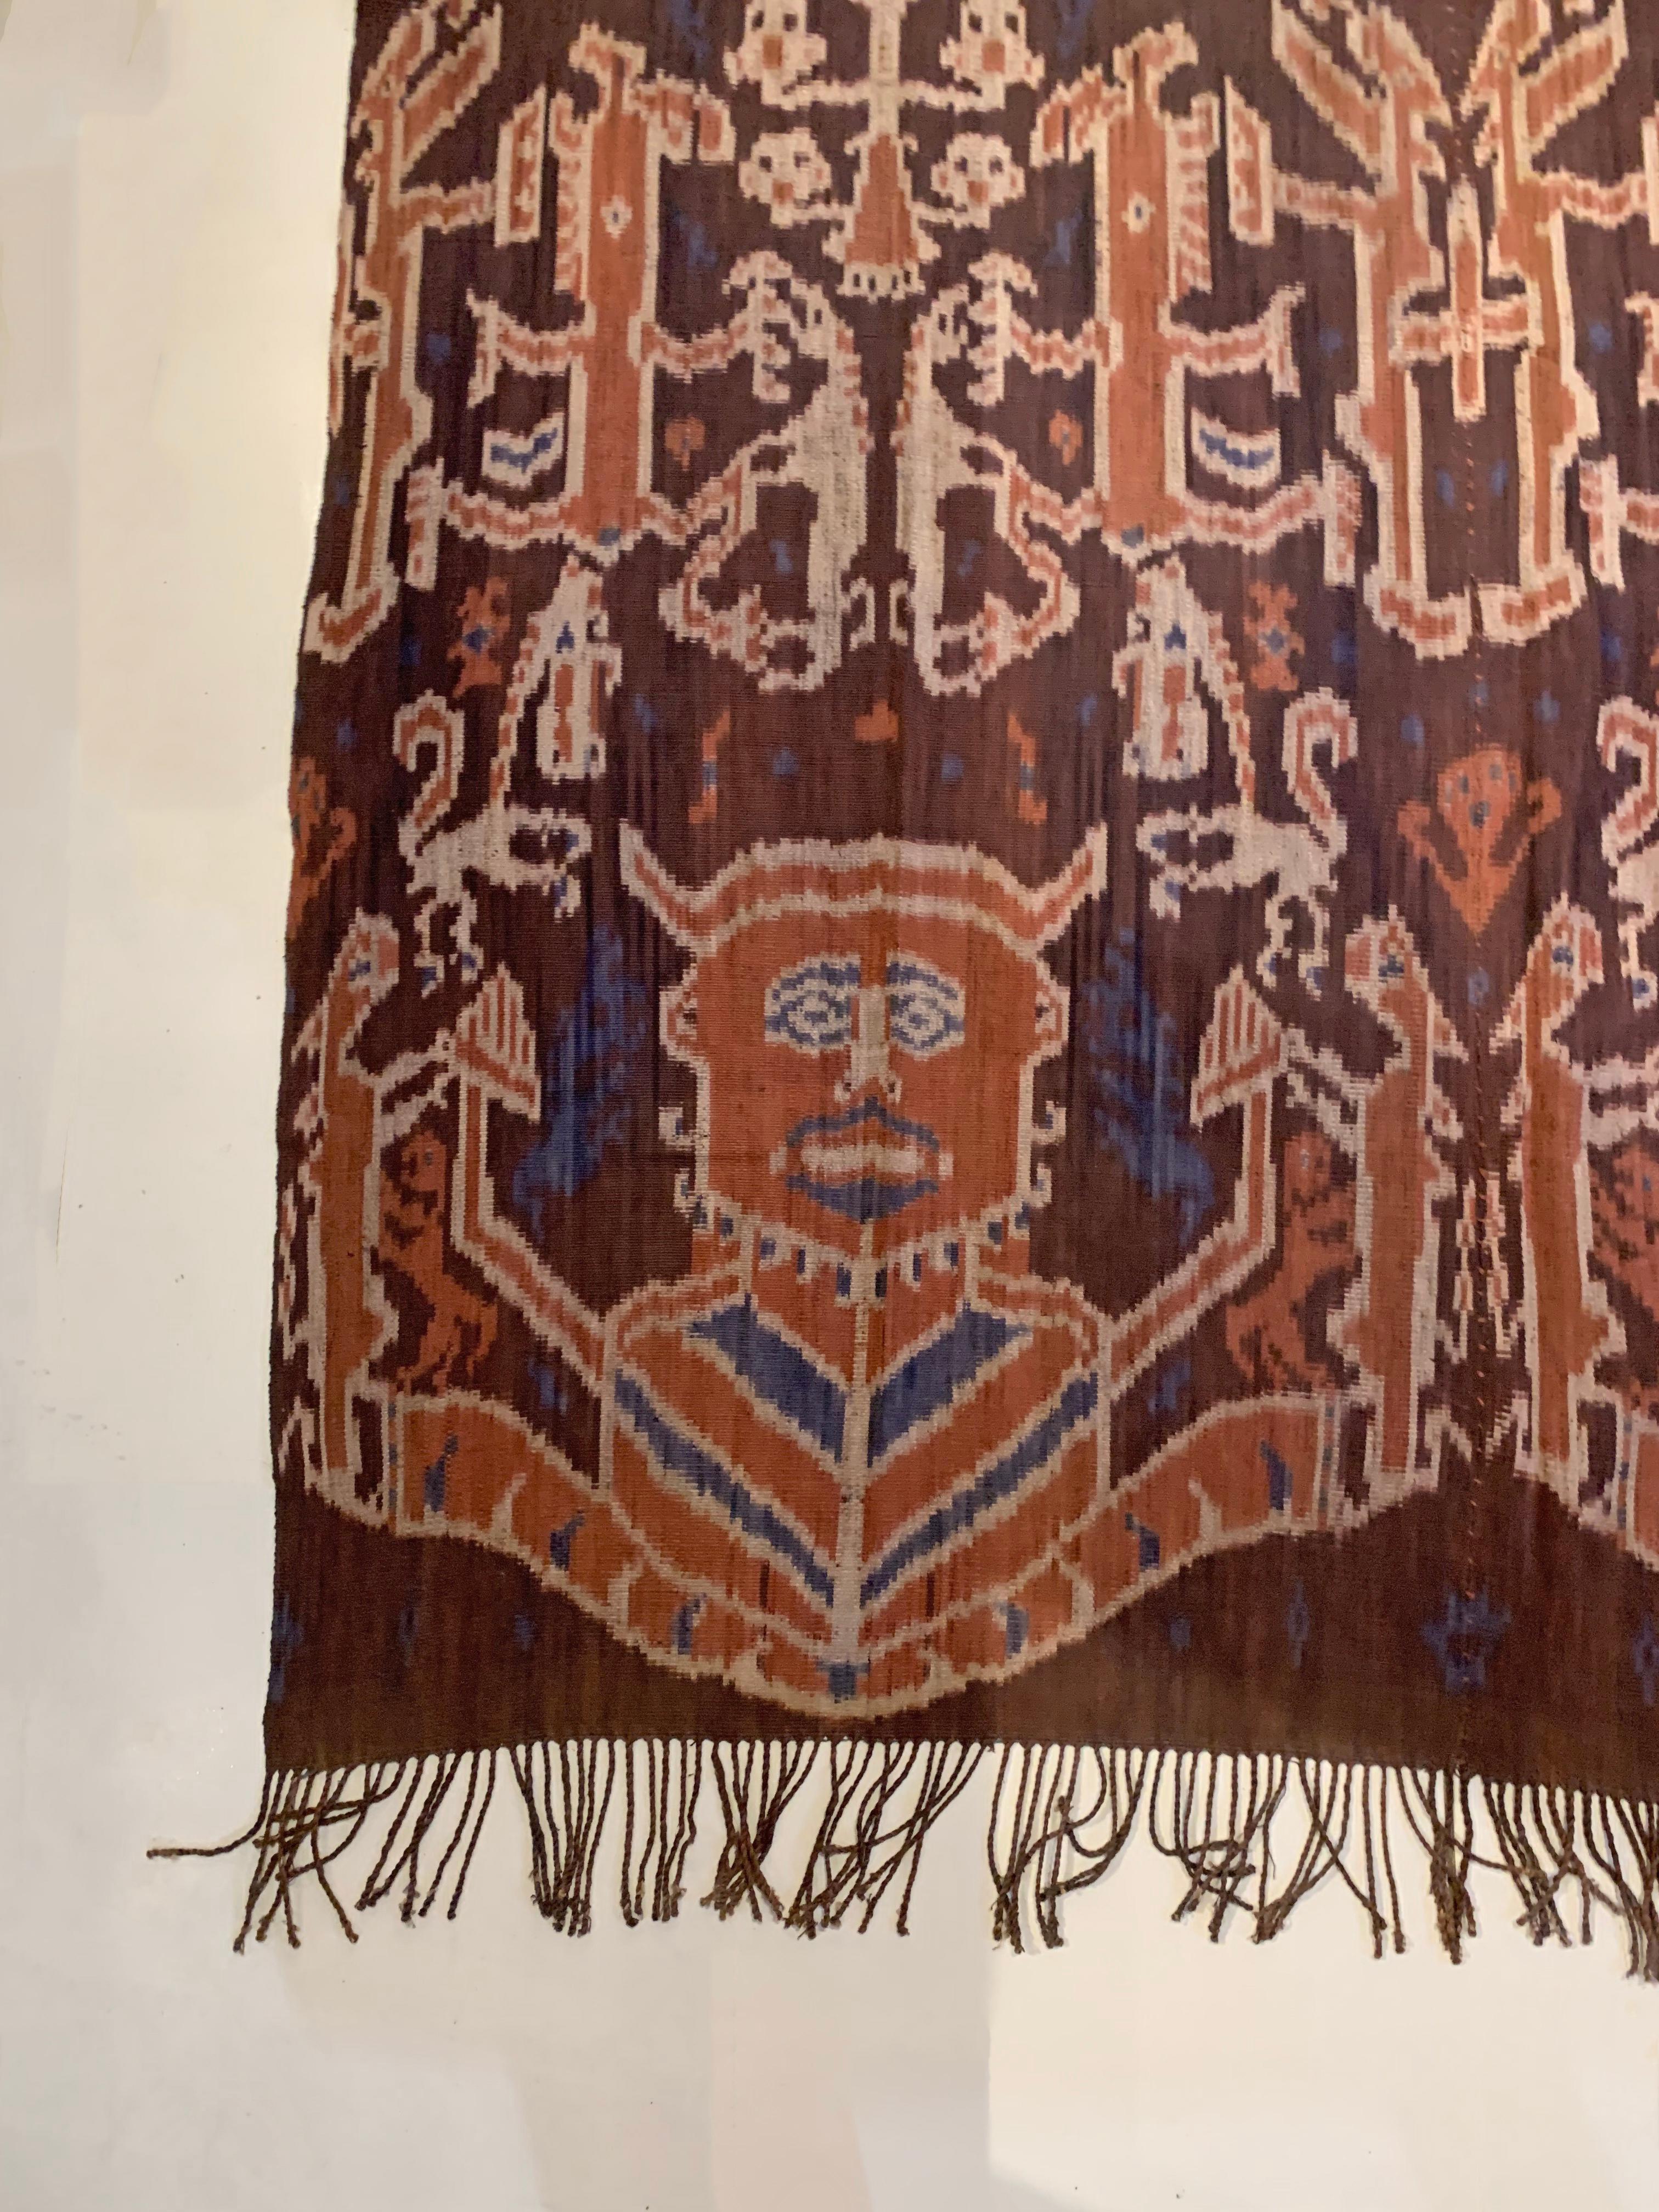 This Ikat textile originates from the Island of Sumba, Indonesia. It is hand-woven using naturally dyed yarns via a method passed on through generations. It features a stunning array of tribal patterns and motifs. It is the women of Sumba who are